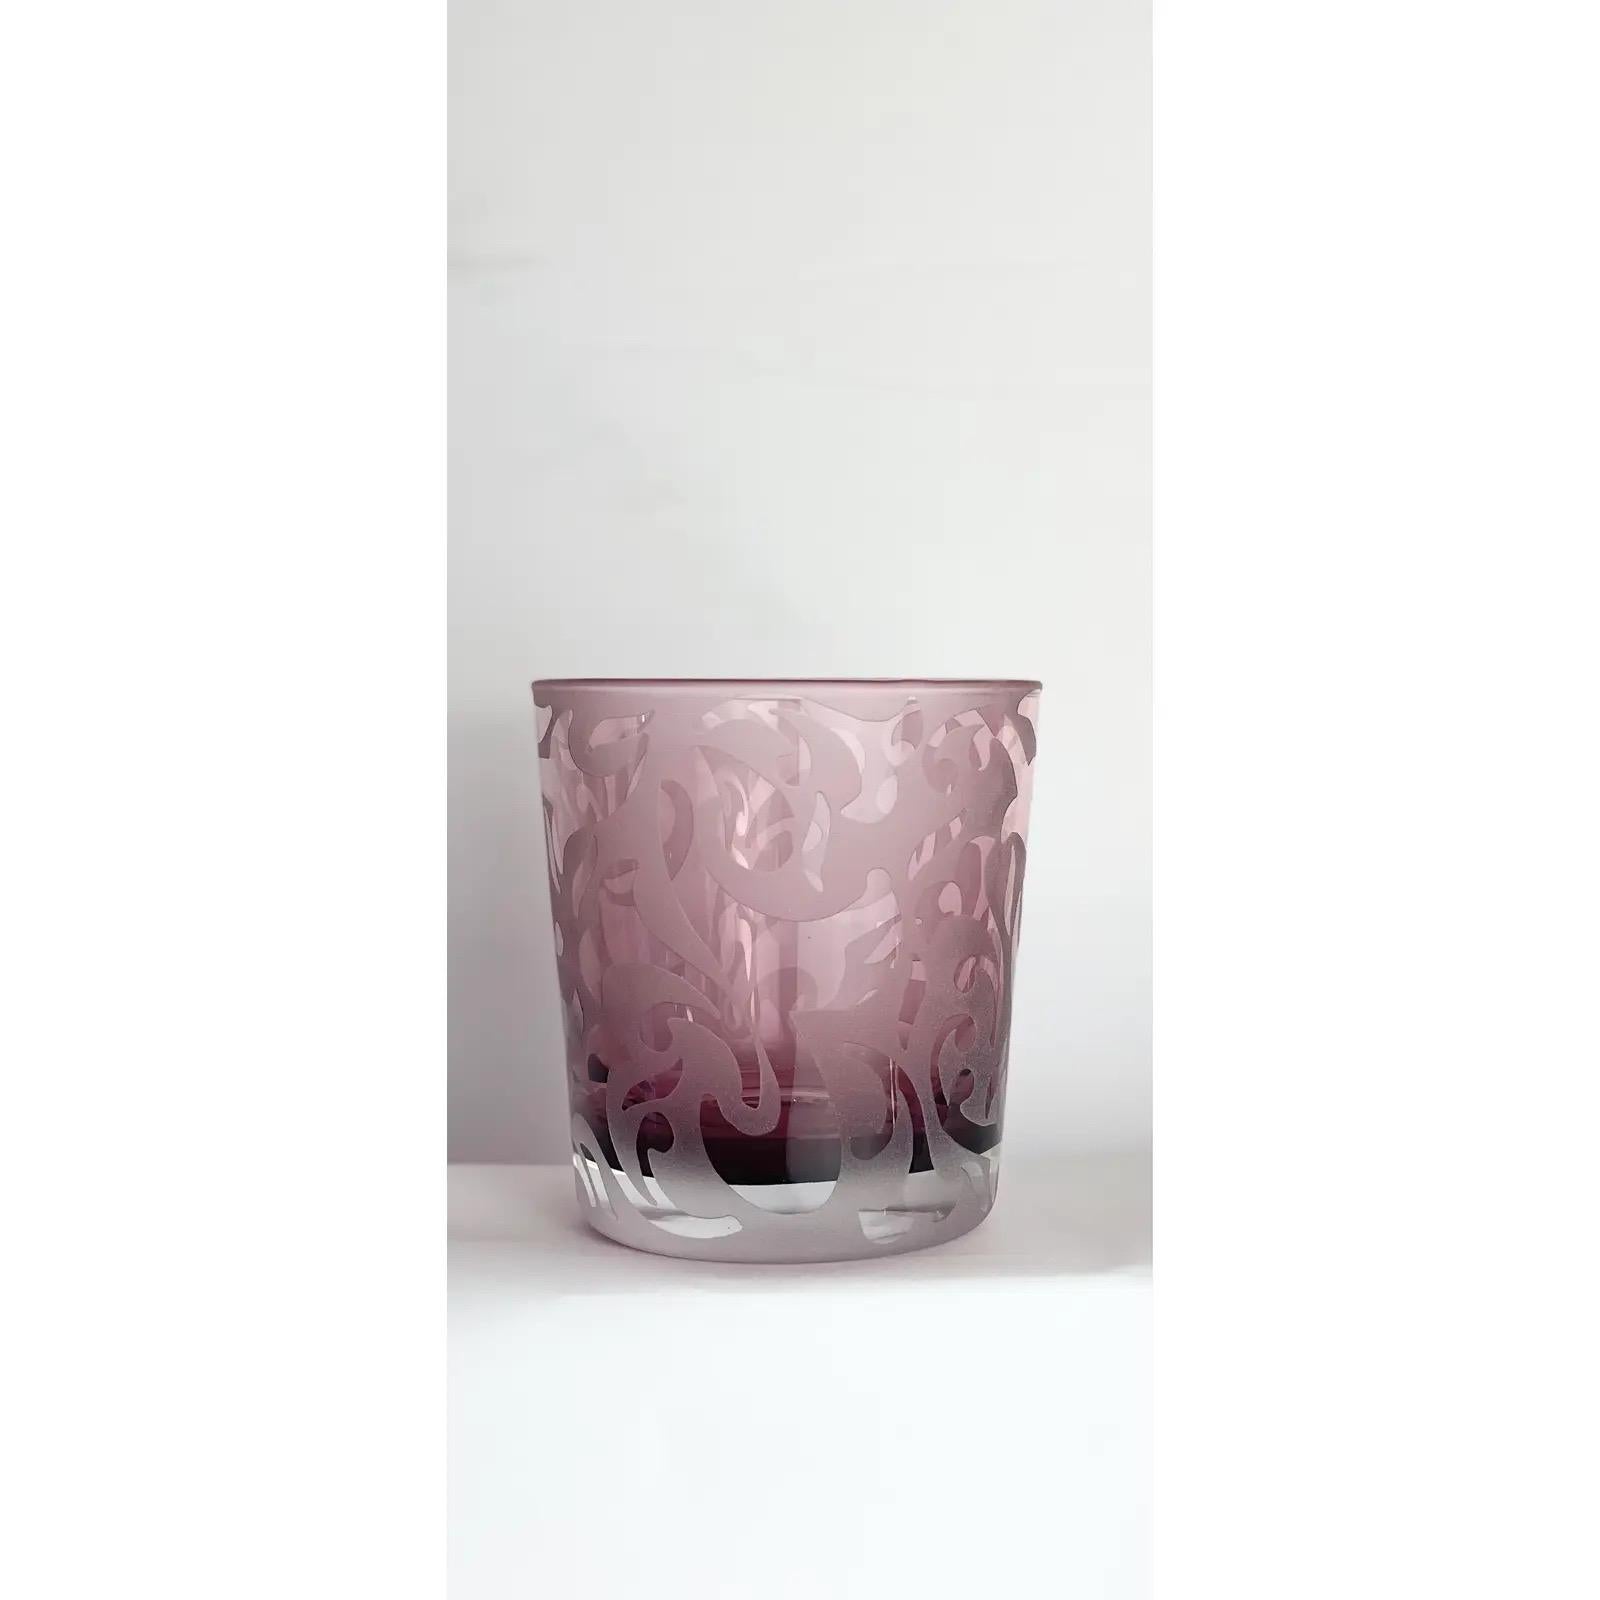 We are very pleased to offer a beautiful and sophisticated set of six tumbler glasses by Michael Weems, circa the 2000s. Known for creating beautiful collections of original and unique artwork, these hand etched set is art for the table. Each glass